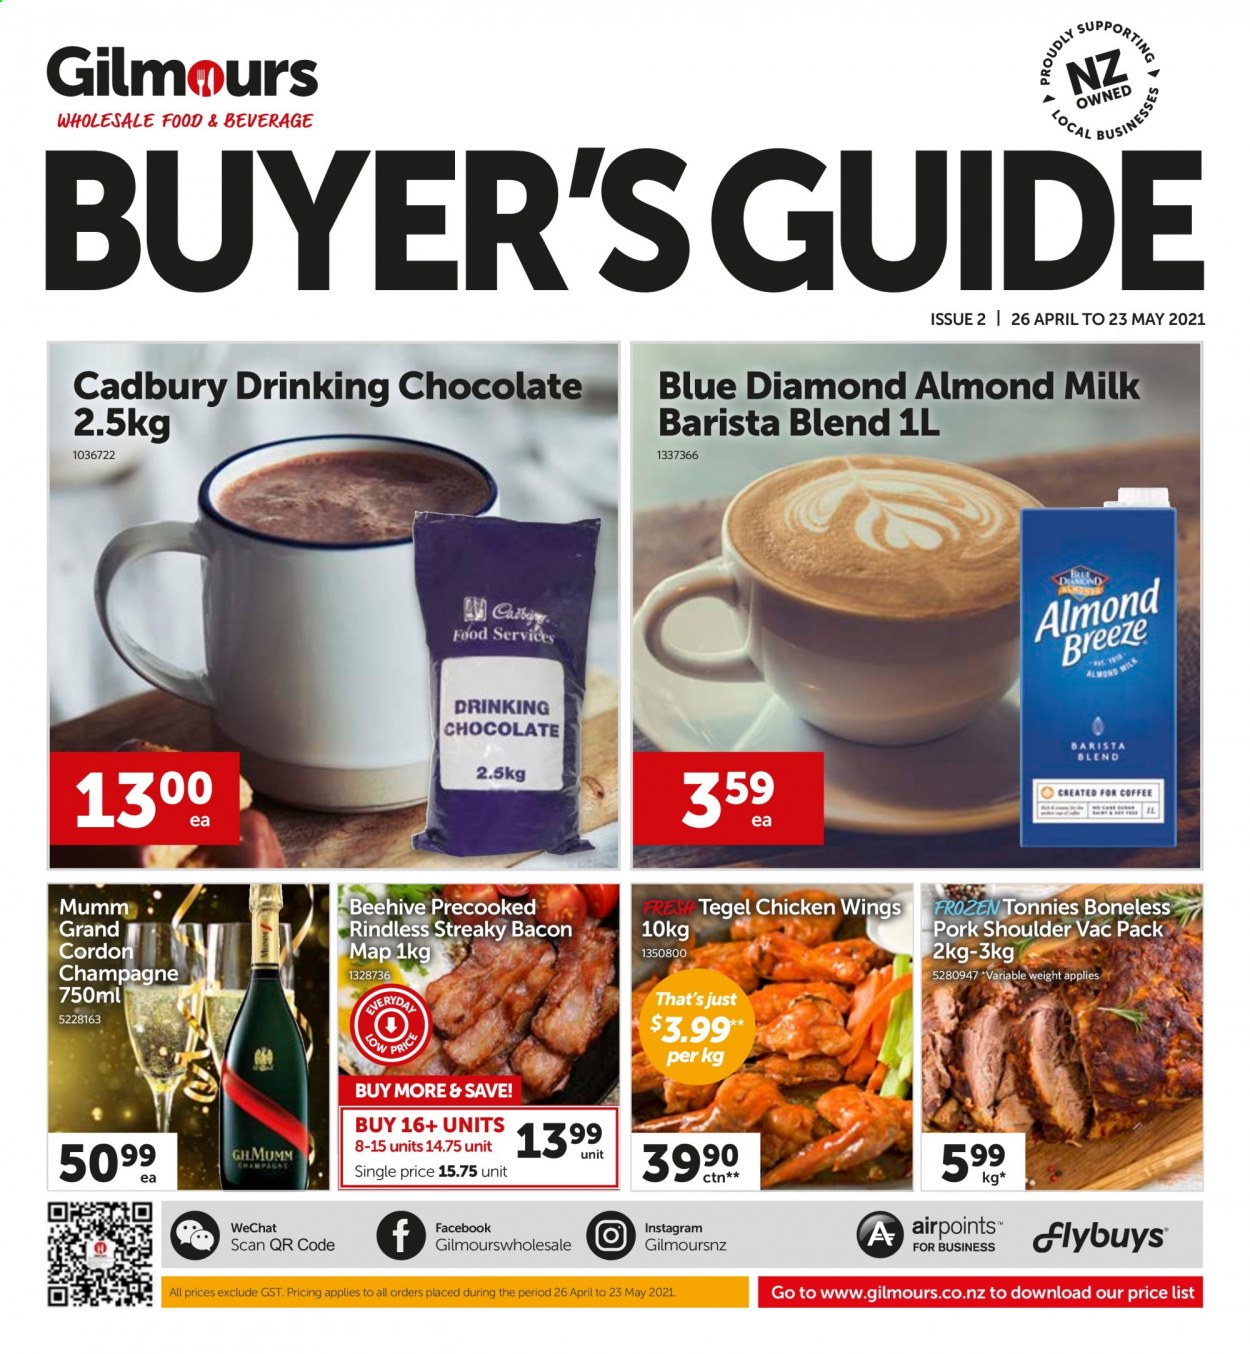 thumbnail - Gilmours mailer - 26.04.2021 - 23.05.2021 - Sales products - bacon, streaky bacon, almond milk, Almond Breeze, chicken wings, chocolate, Cadbury, Blue Diamond, hot chocolate, champagne, pork meat, pork shoulder. Page 1.